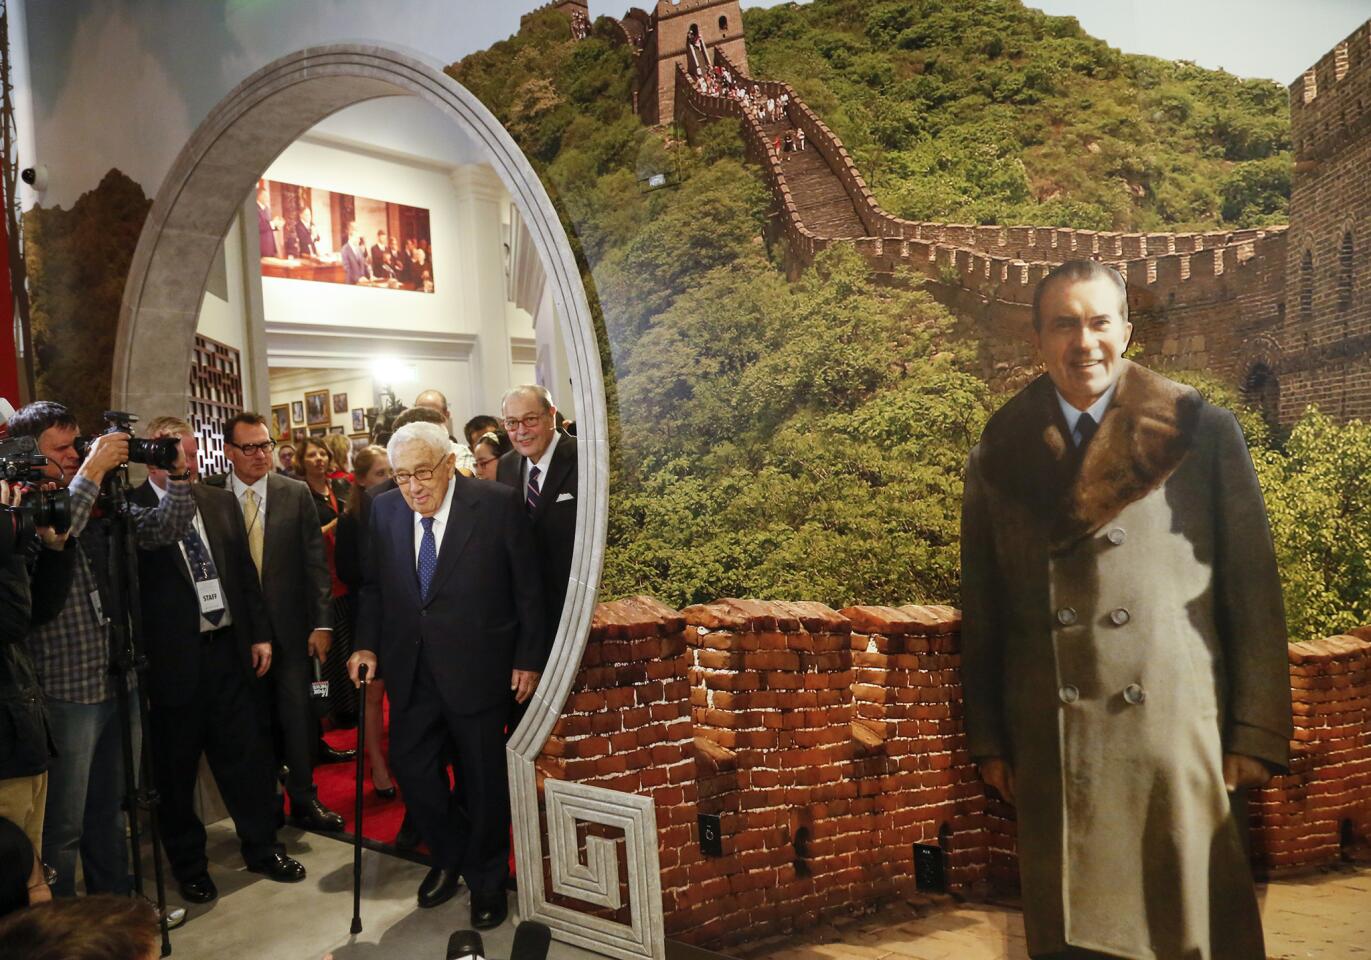 Former Secretary of State Henry Kissinger enters an exhibit in the Richard Nixon Presidential Library and Museum in Yorba Linda where guests can pose with a life-size backdrop of Nixon in front of the Great Wall of China.